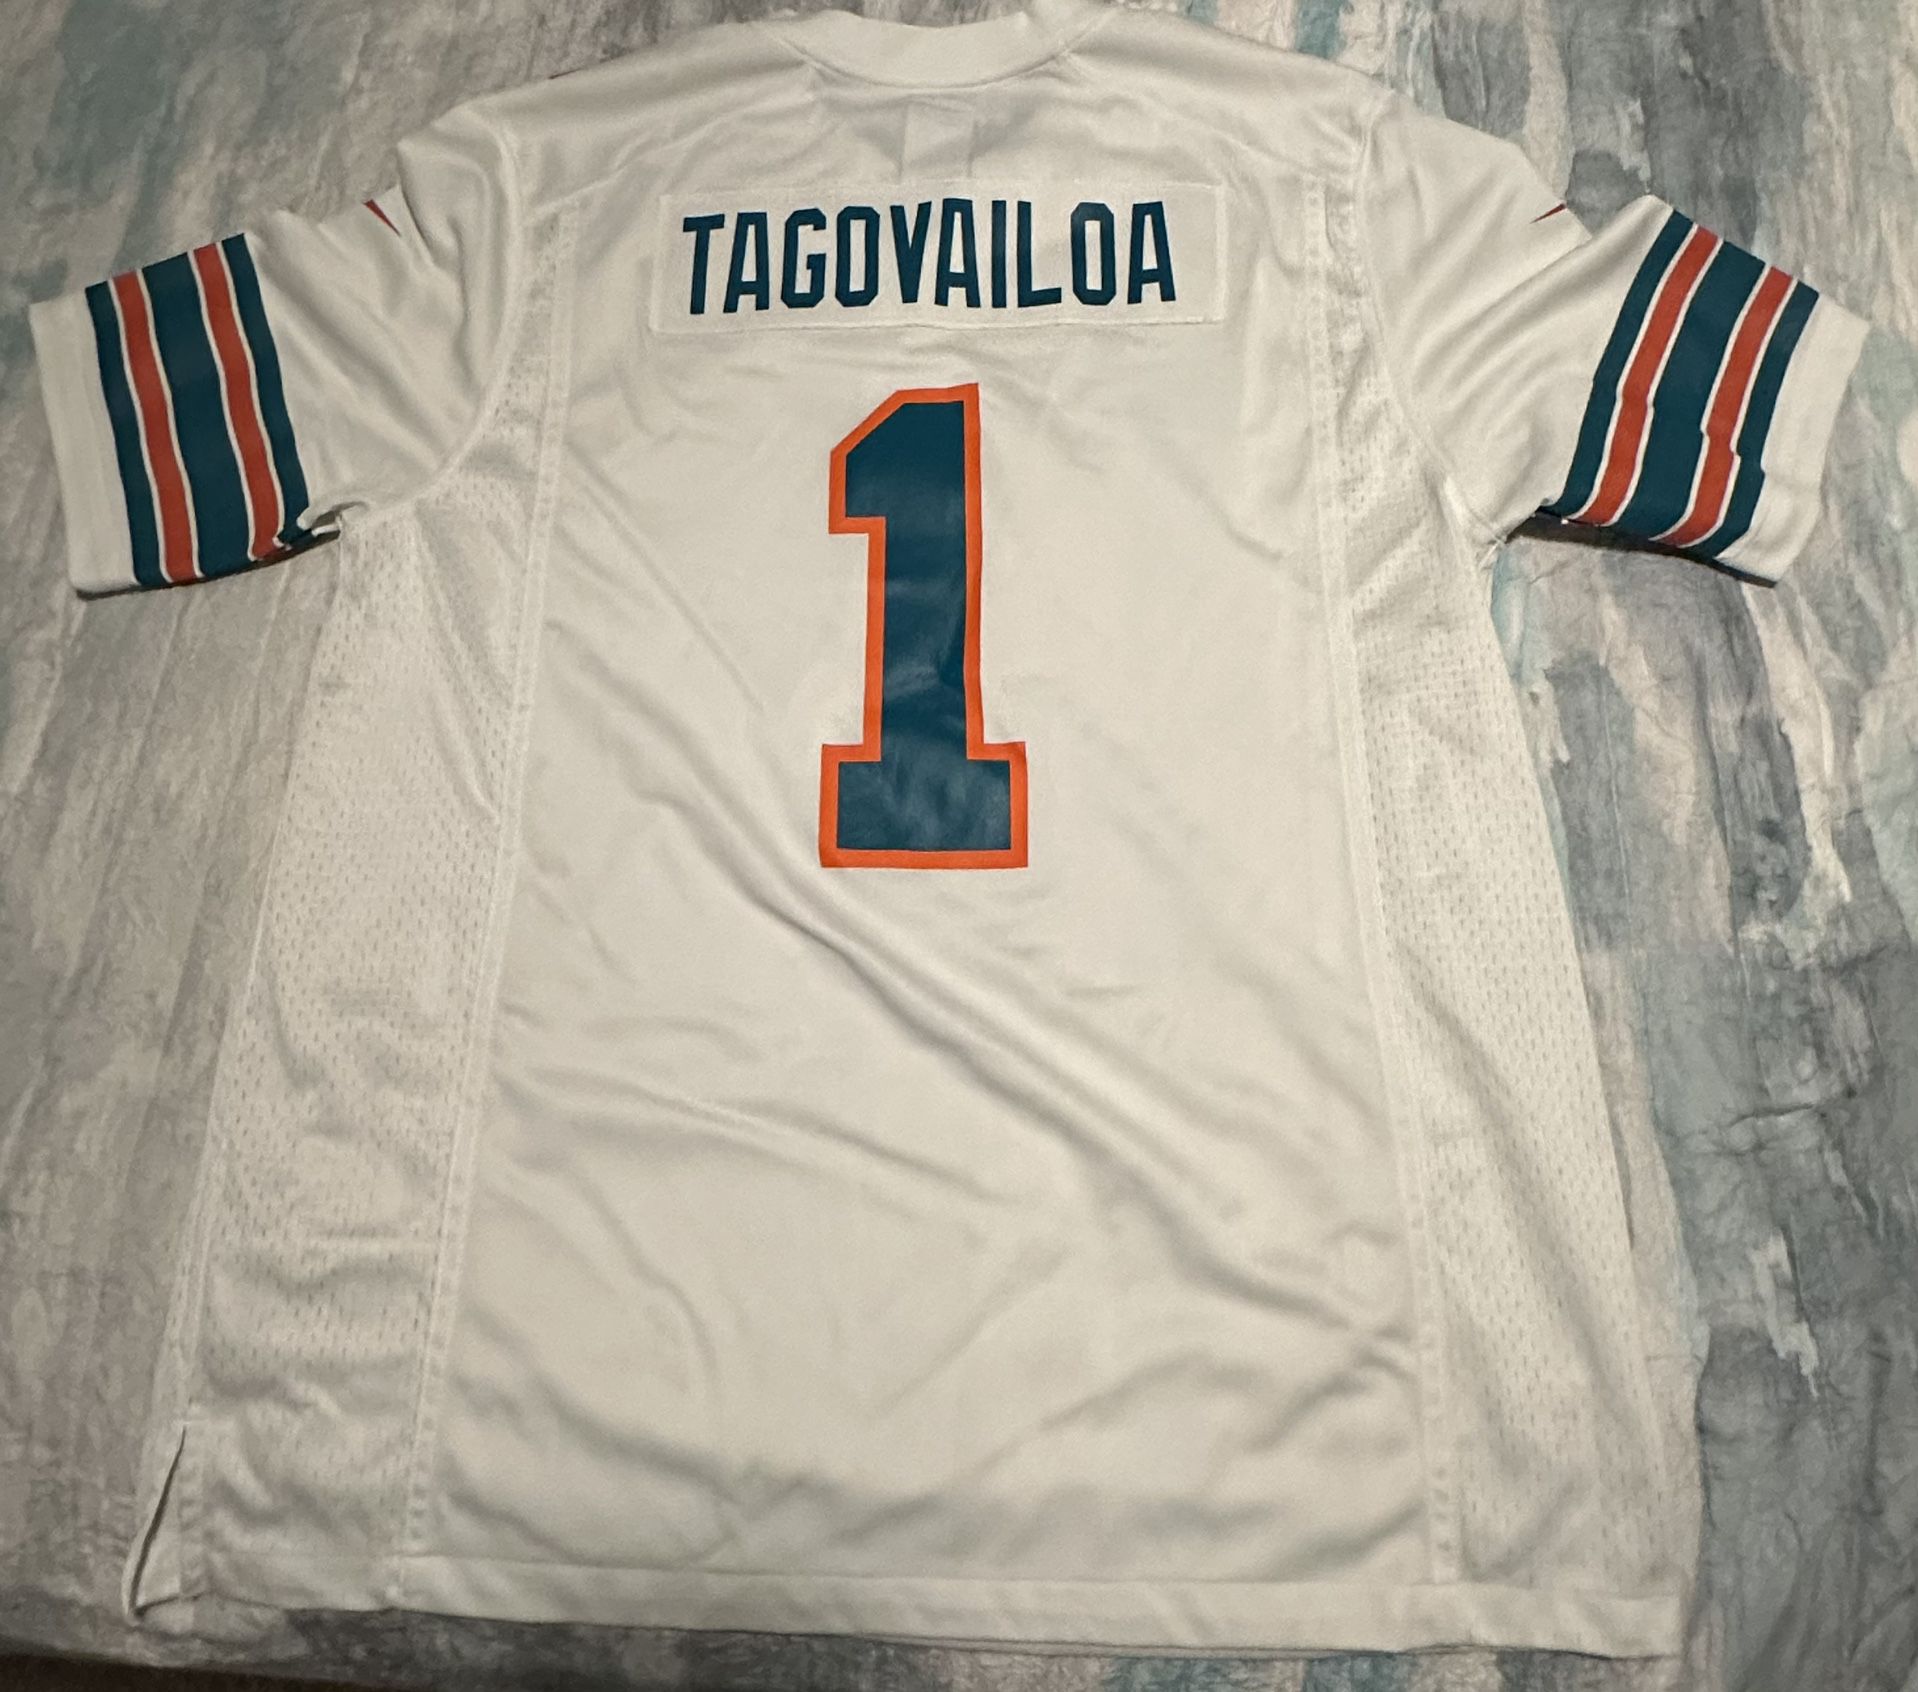 Officials Mens Large Miami Dolphins Tagovailoa Jersey by Nike ❤️GREAT GIFT!❤️